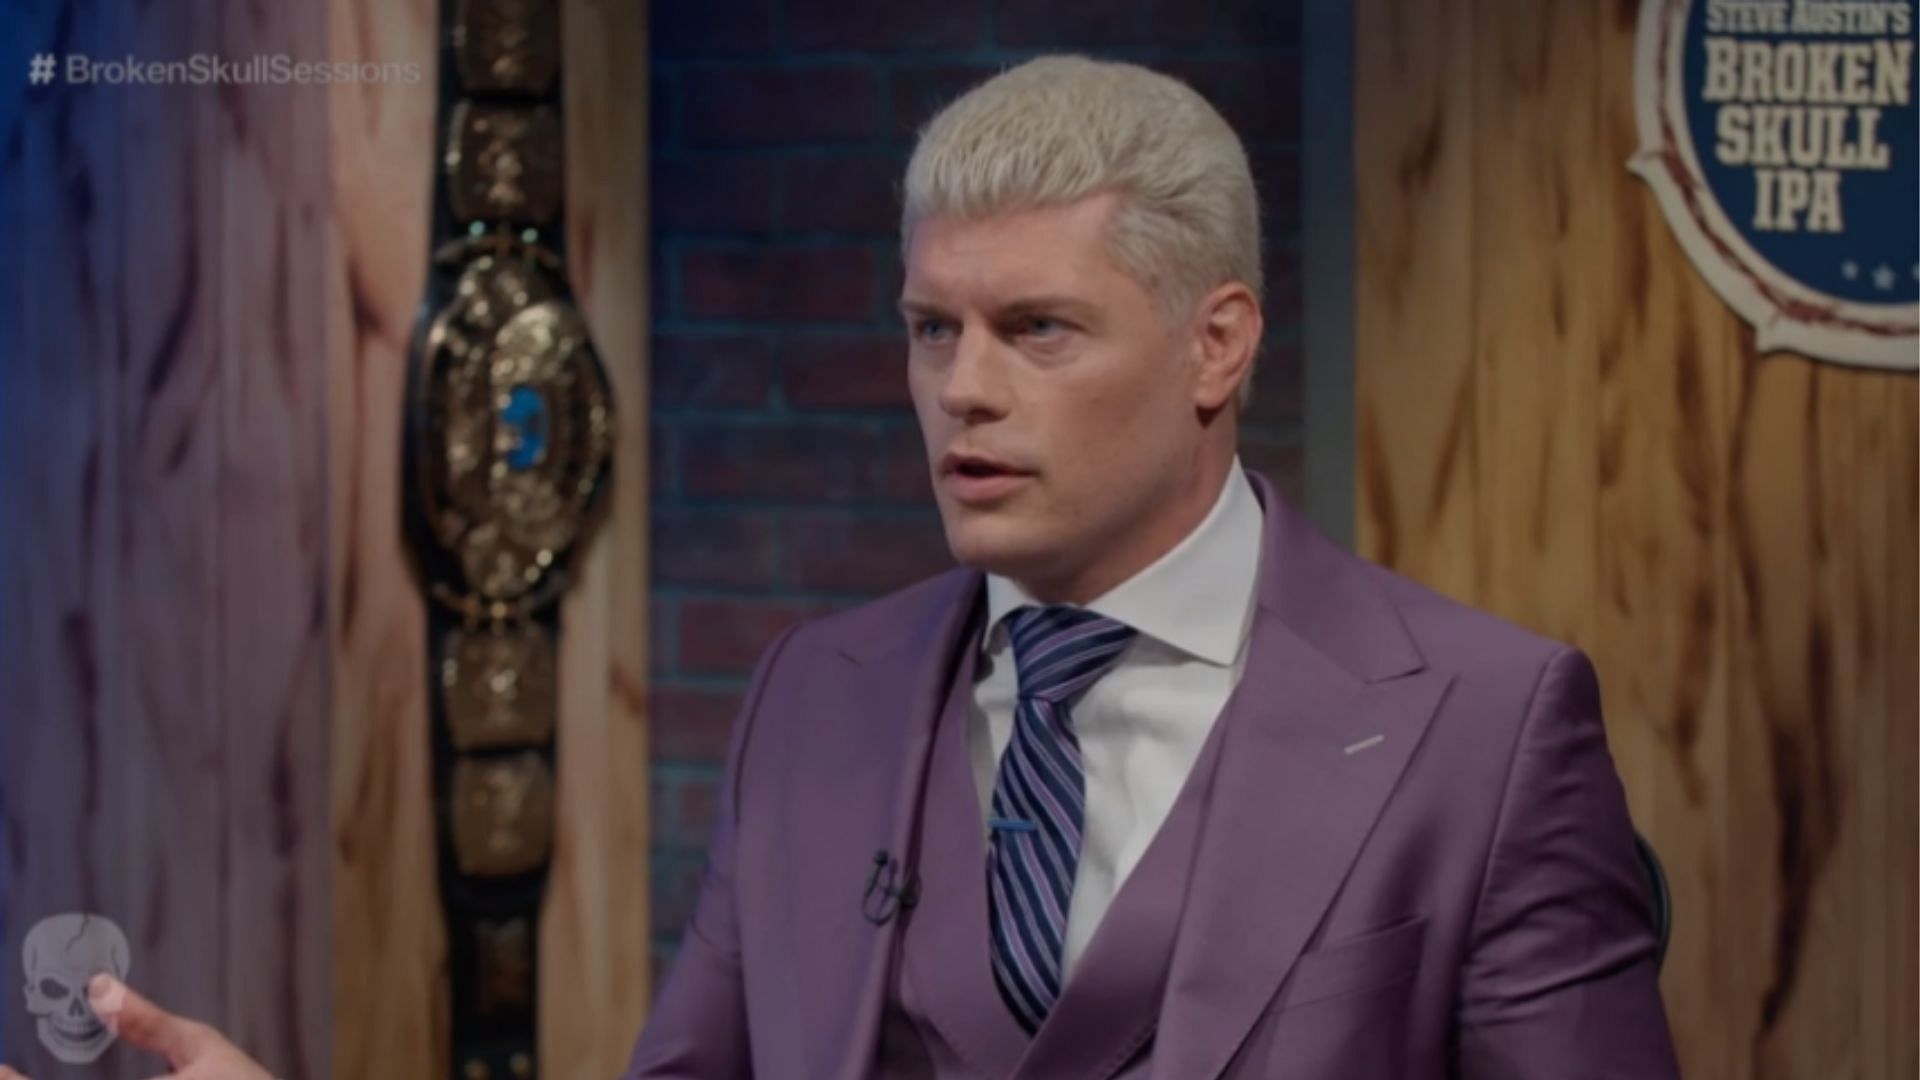 WWE RAW Superstar Cody Rhodes appeared on Broken Skull Sessions